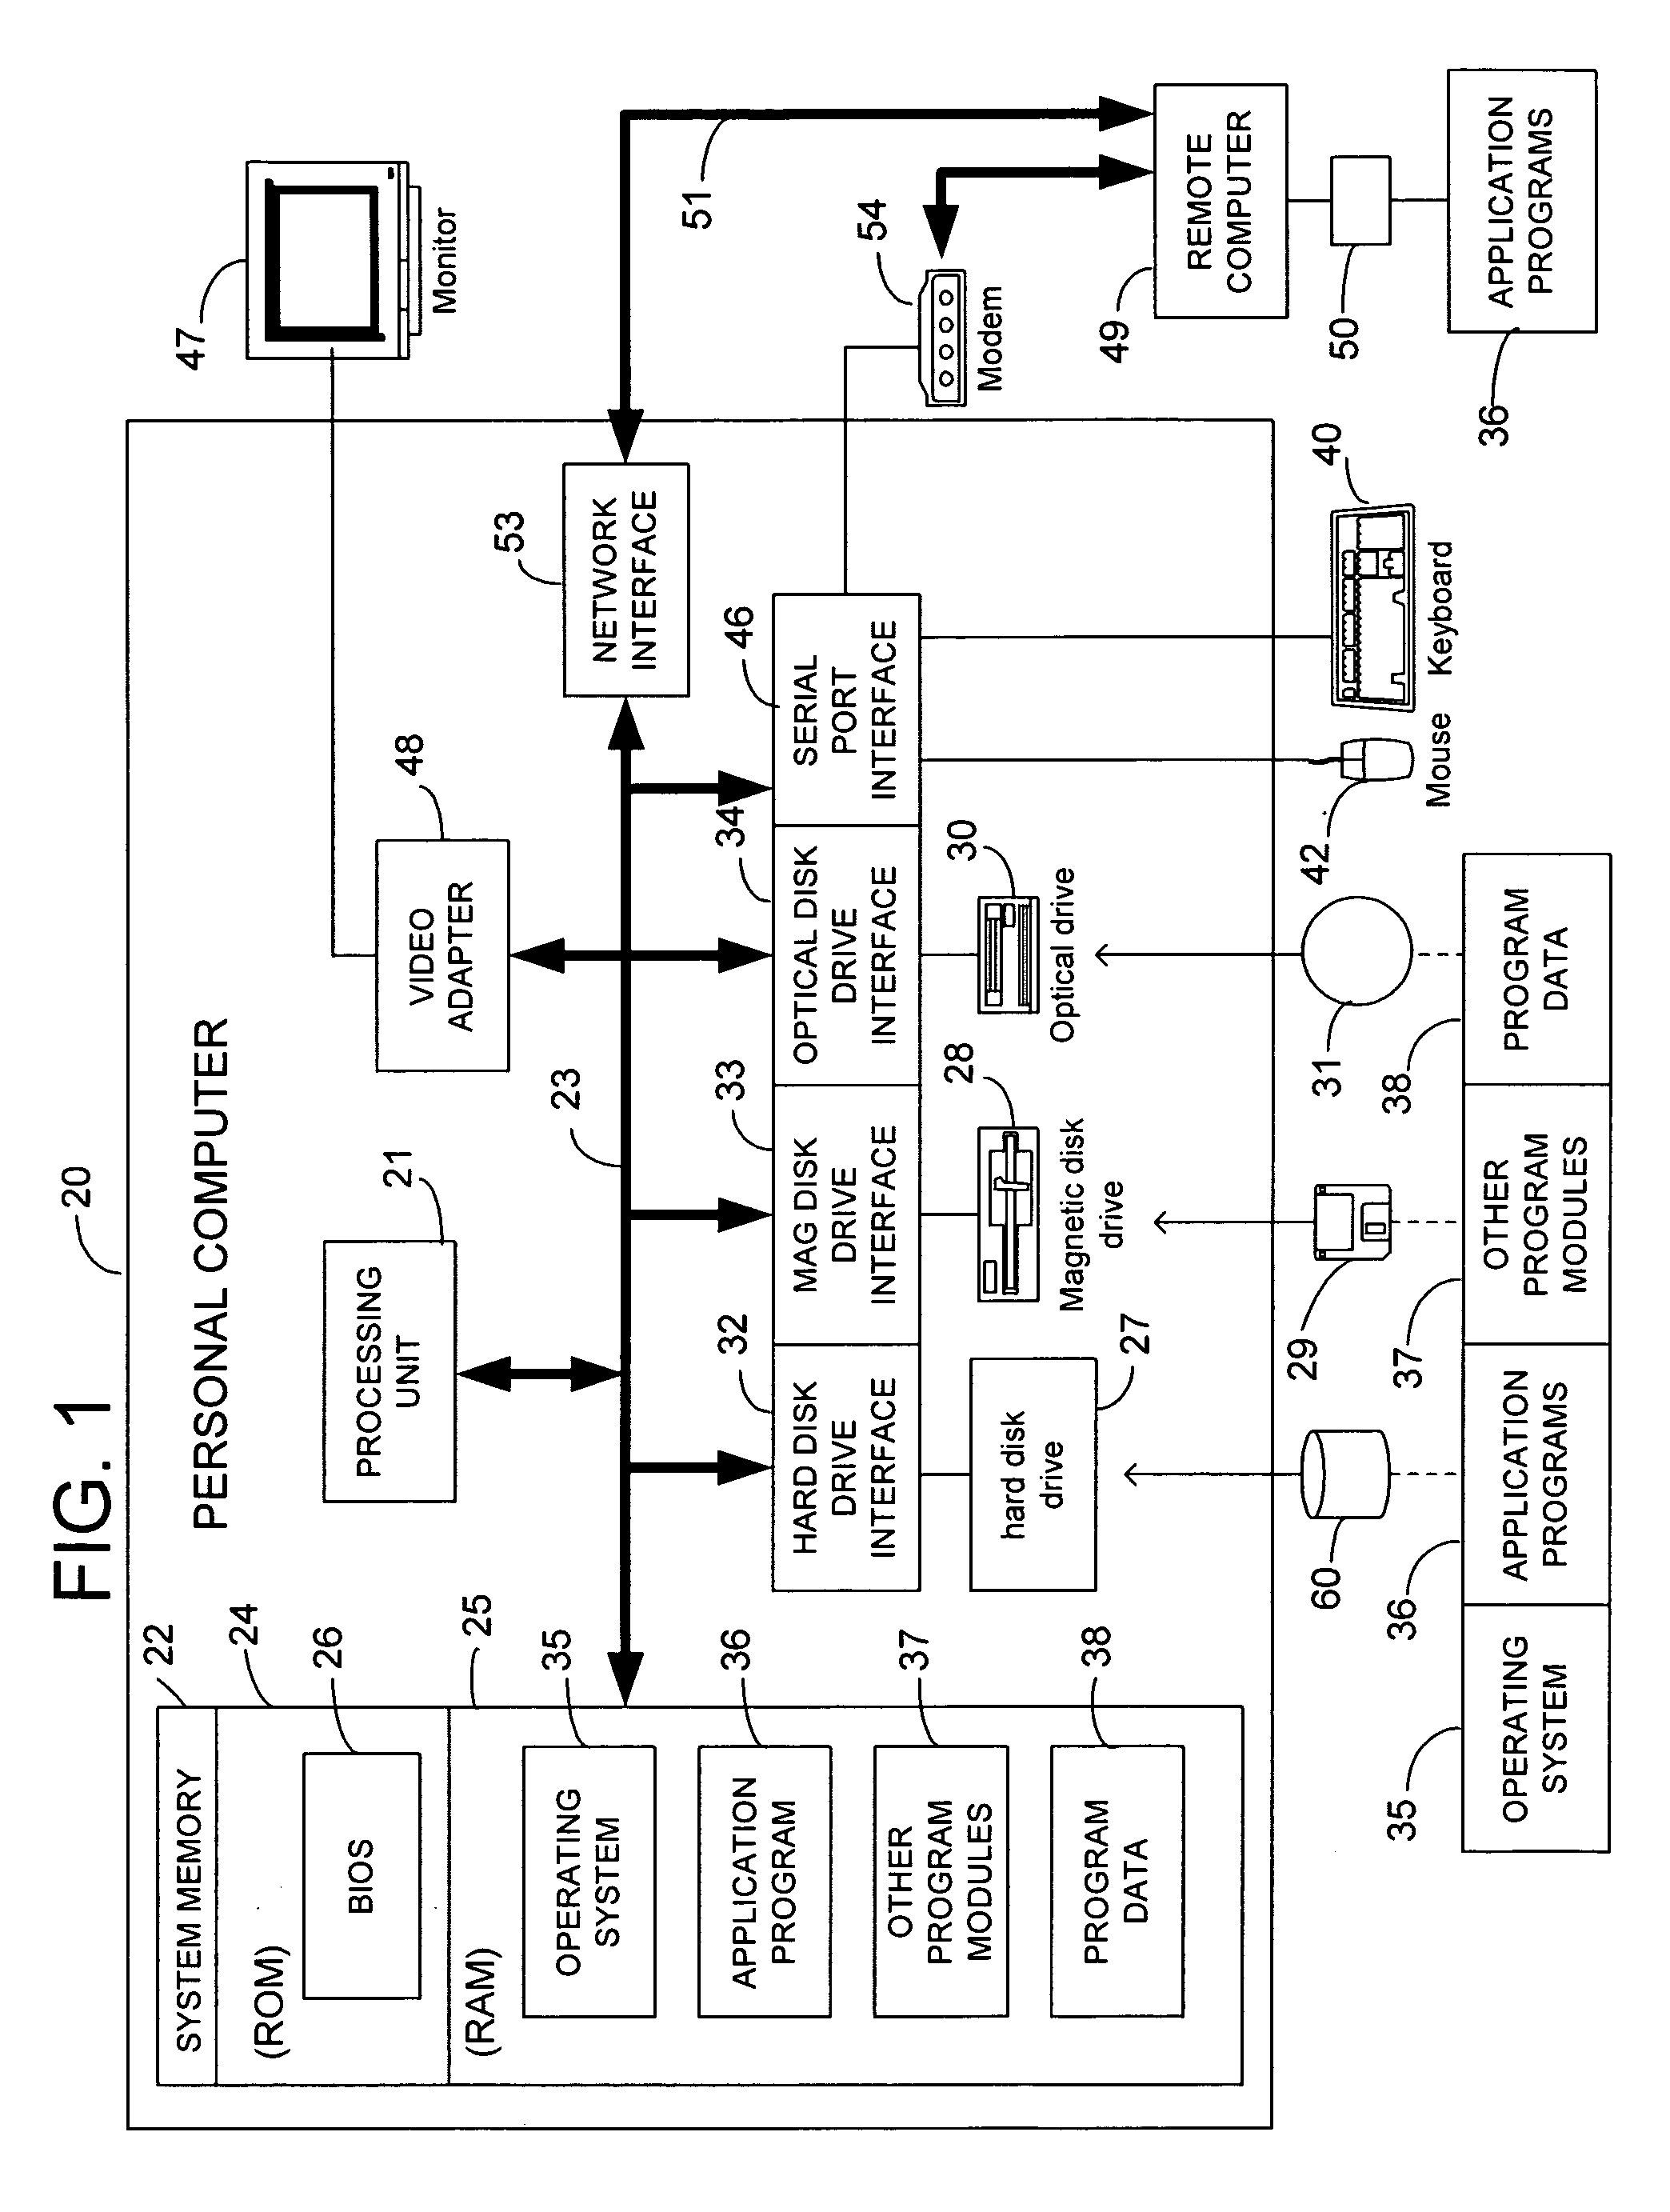 System and method for linguistic collation